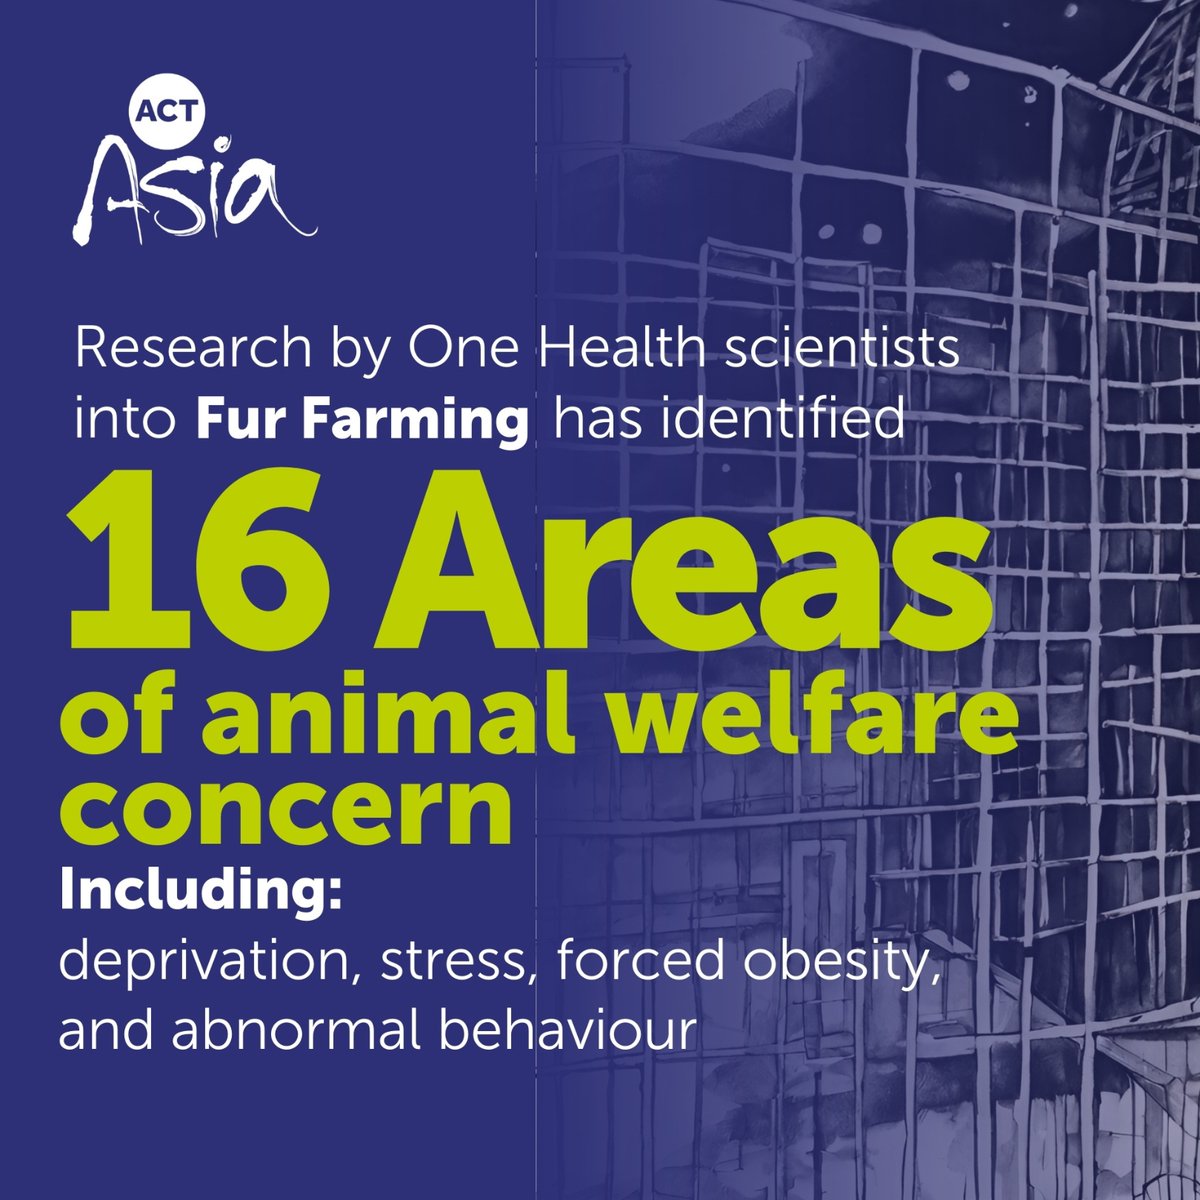 One Health research exposing the damaging impact of fur farming has been published in 'Frontiers' This first close review on fur farming, commissioned by ACTAsia, highlights the threat to human, animal & environmental health. More here: tinyurl.com/mr2btefw